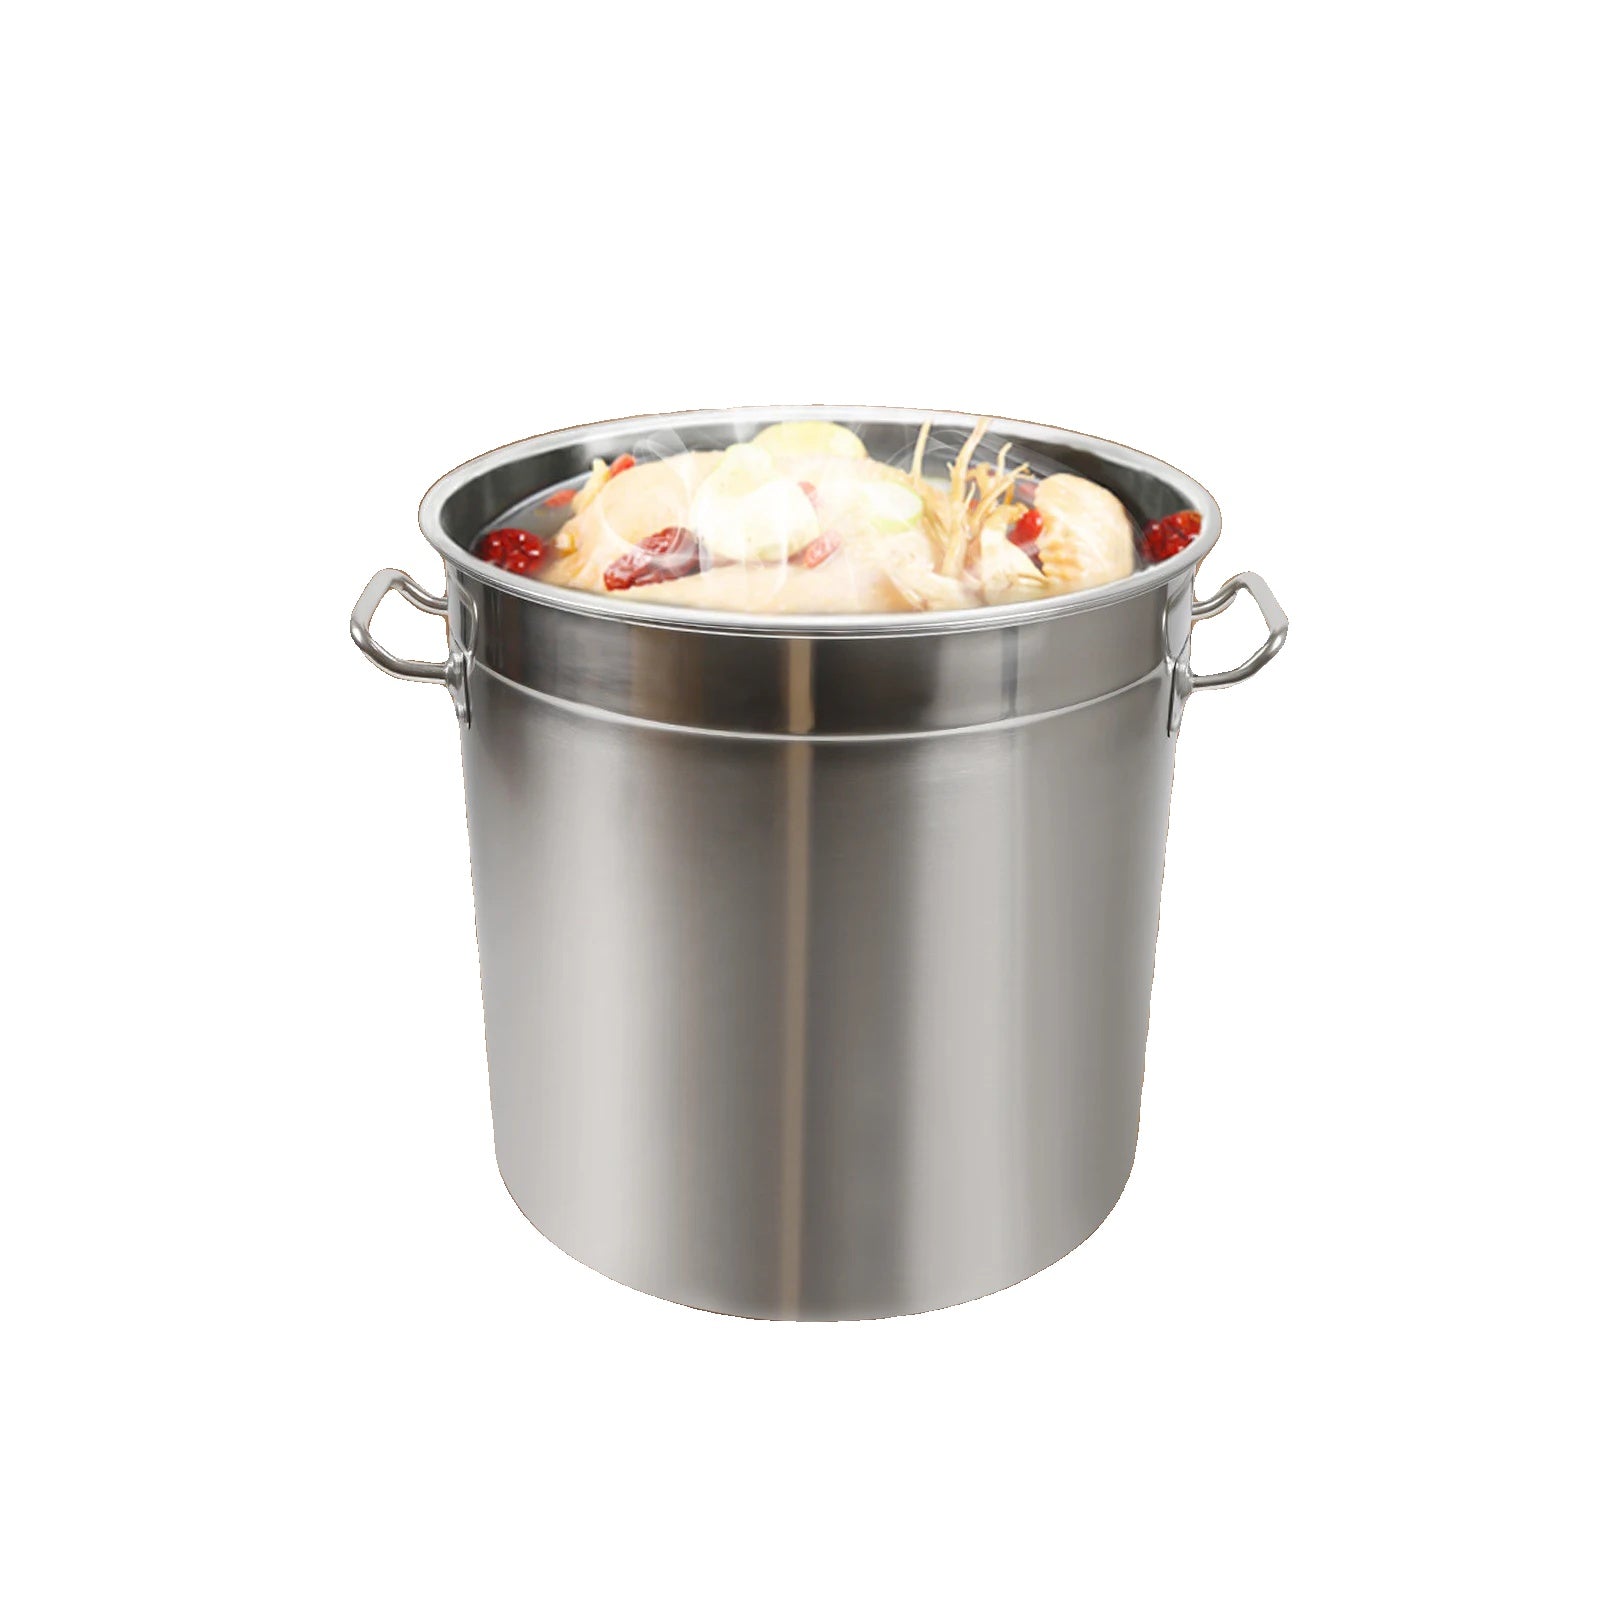 Cooking Pot, 35liter, Stainless Steel Lid